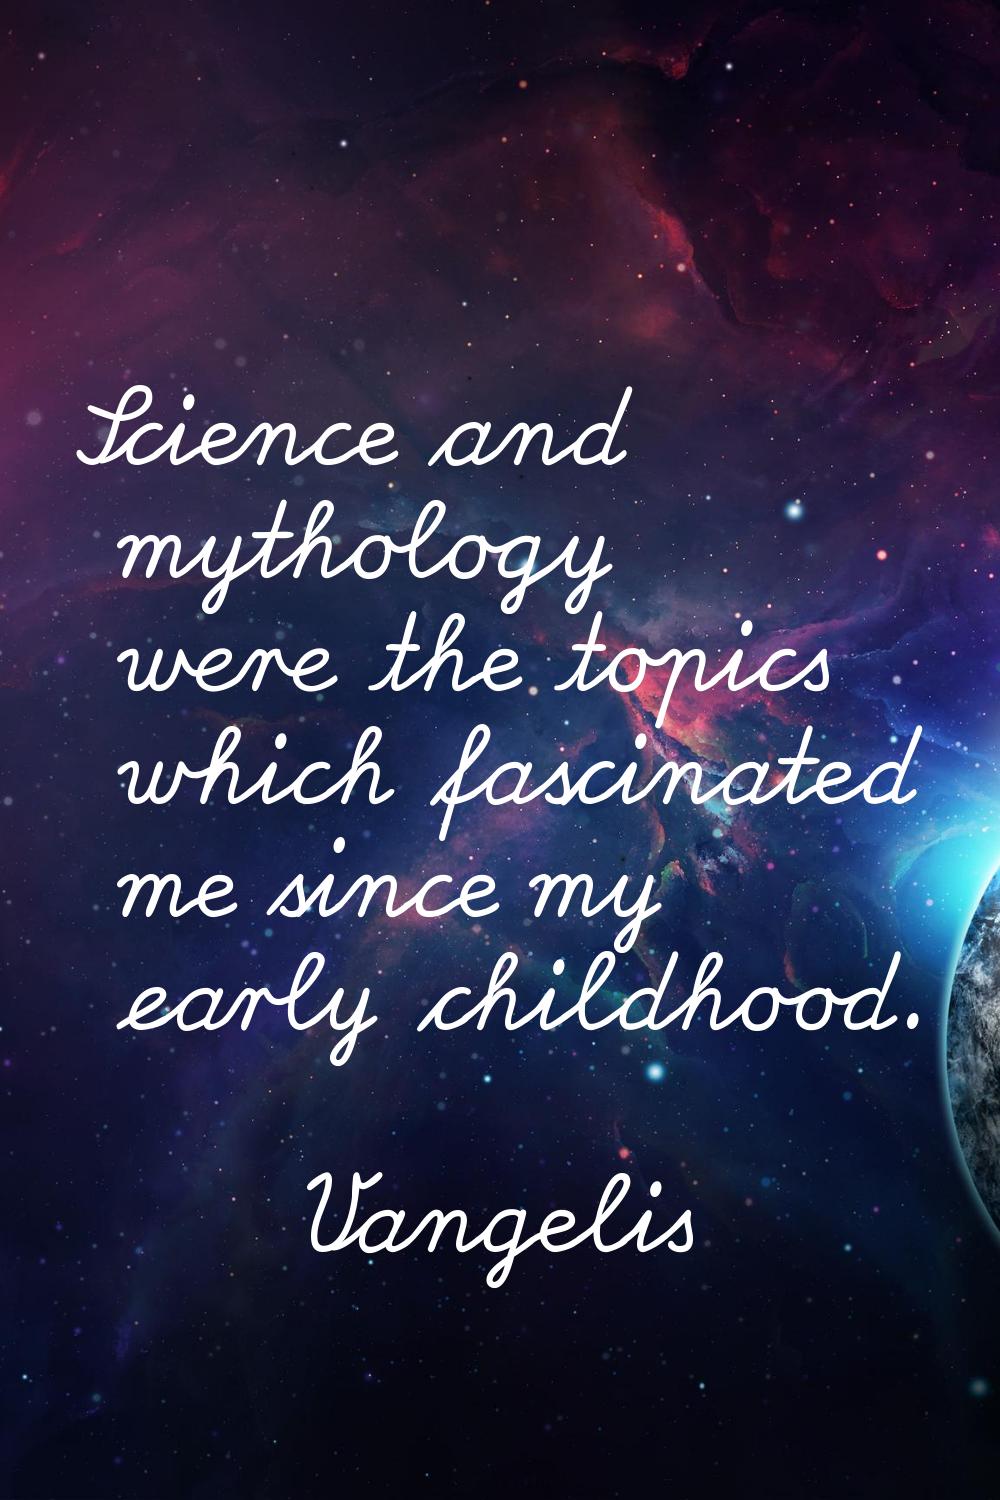 Science and mythology were the topics which fascinated me since my early childhood.